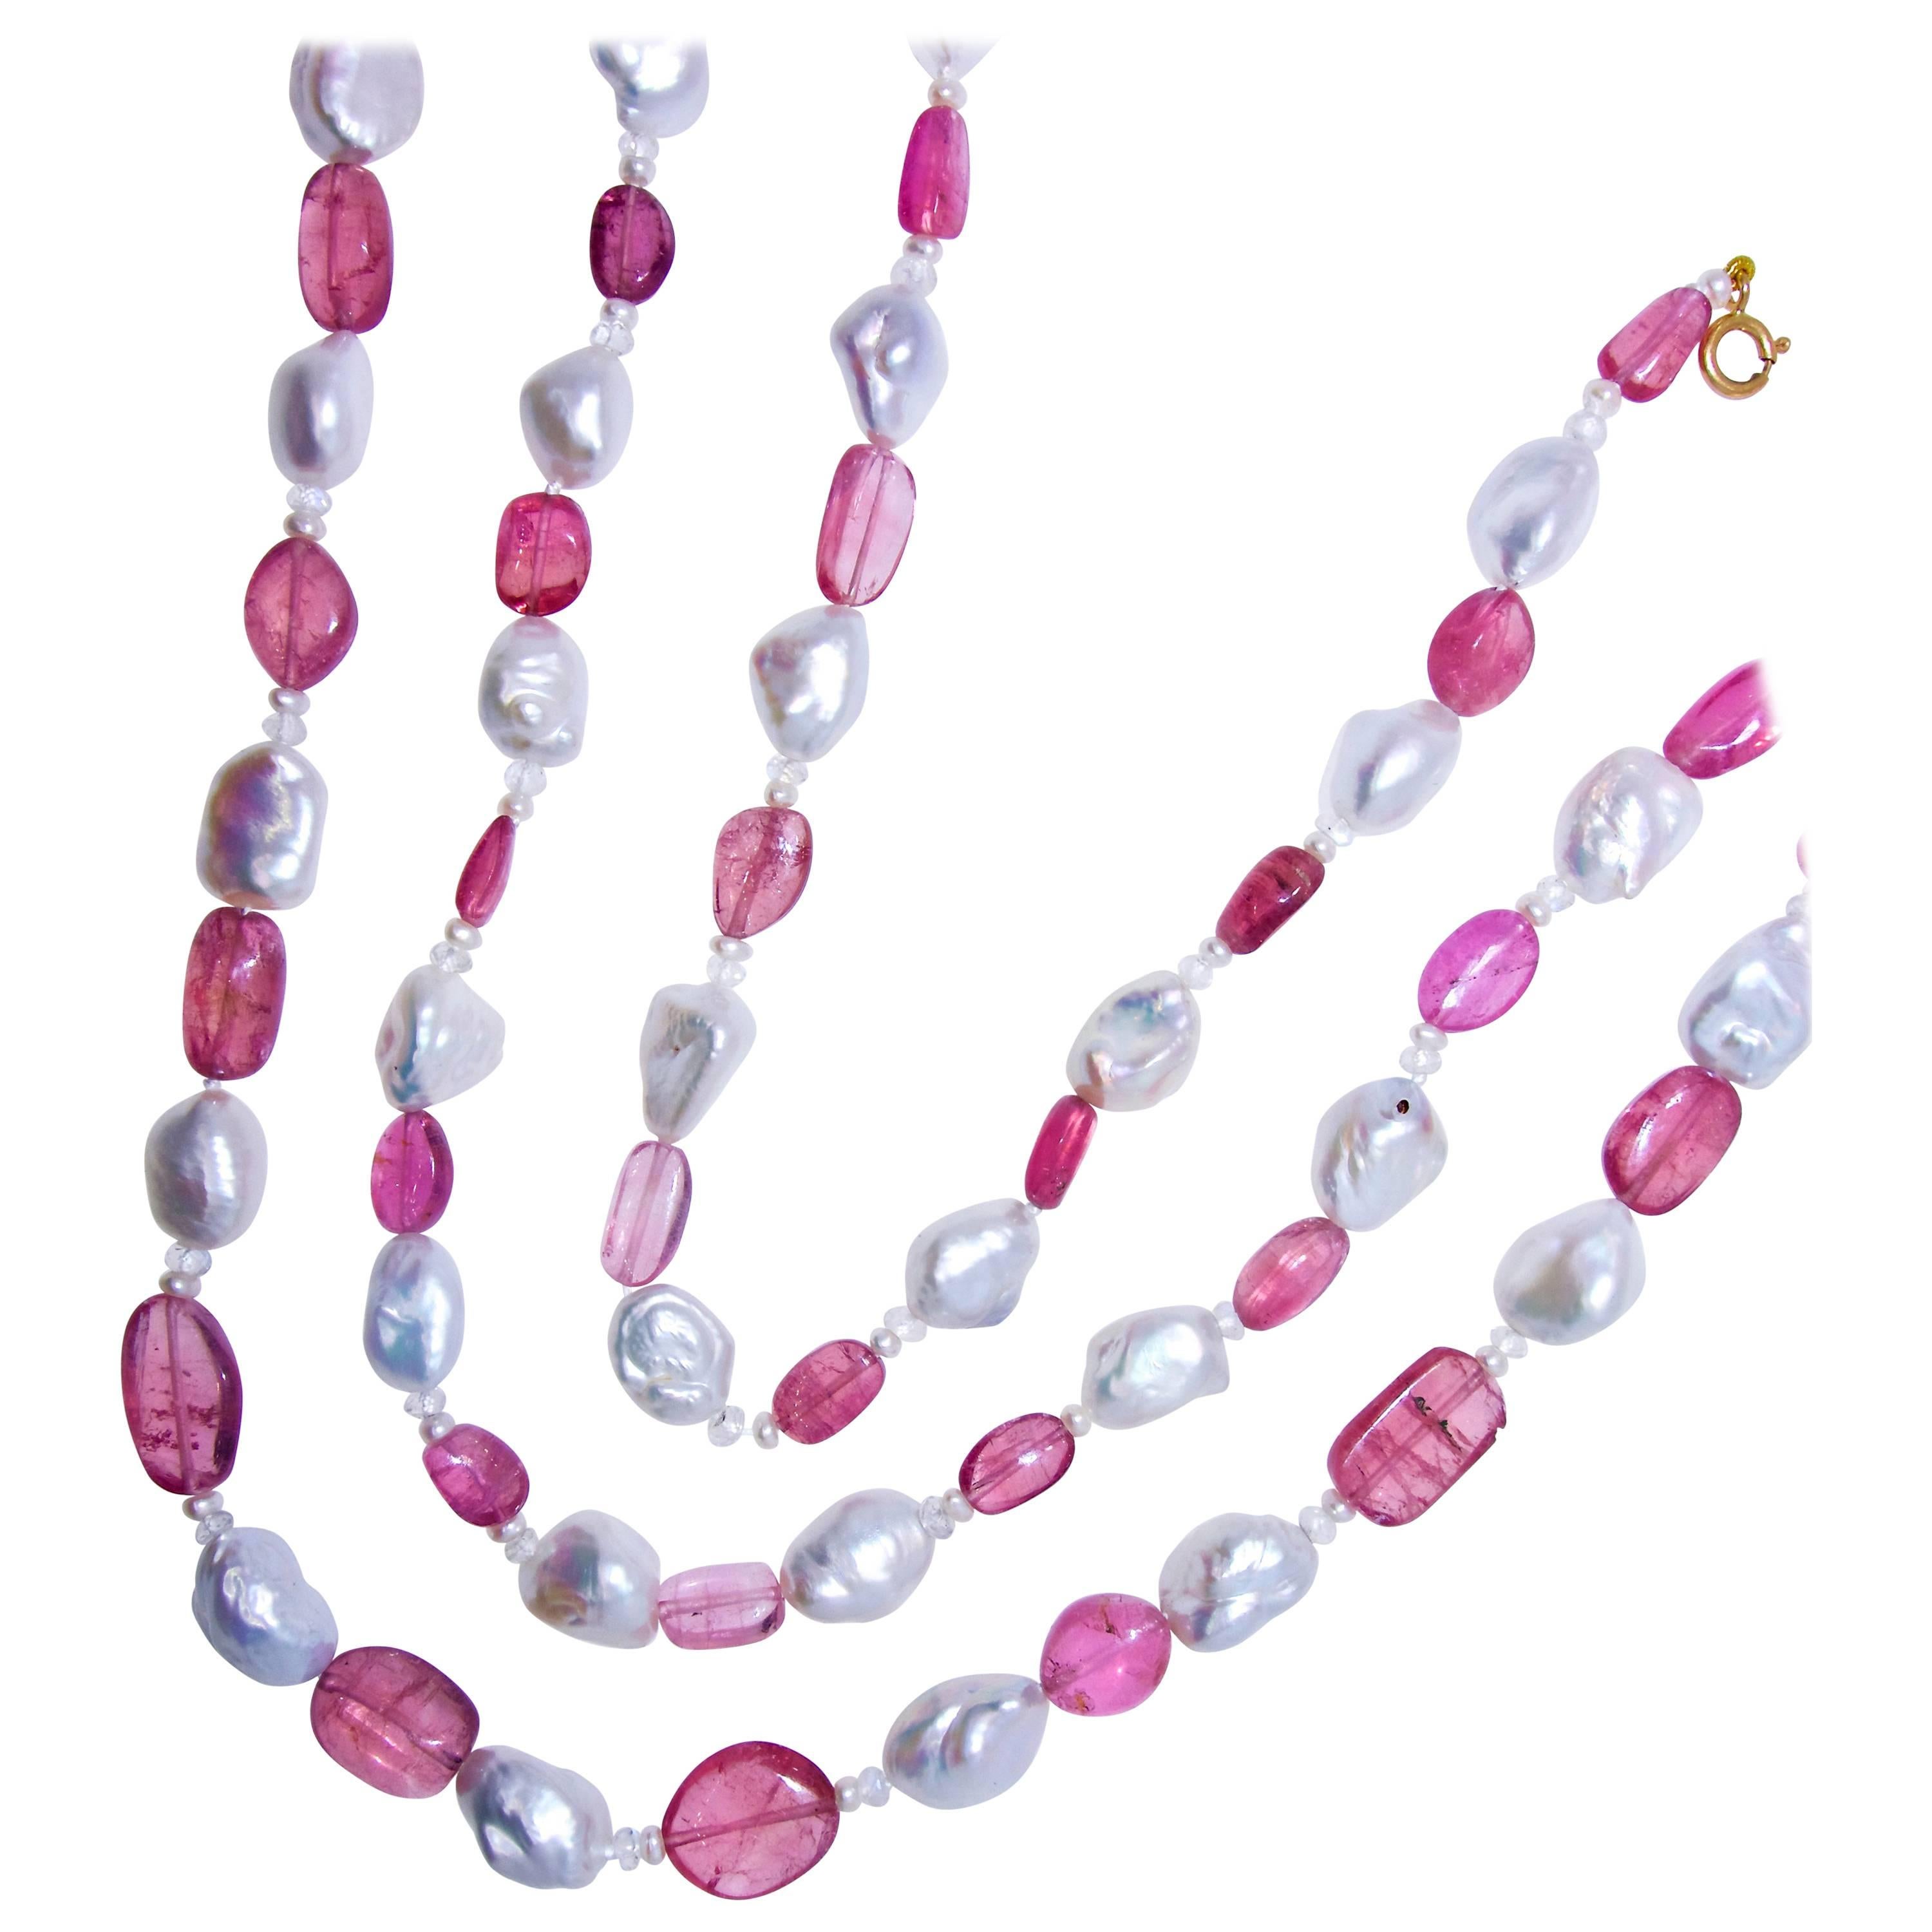 Pink tourmalines are all a bright pink and lively color, 42 stones, slightly graduating in size and amounting to approximately 175 cts.  Interspersed are 40 natural baroque pearls ranging in size from 9.5 to 12.5 mm.  There are also small natural